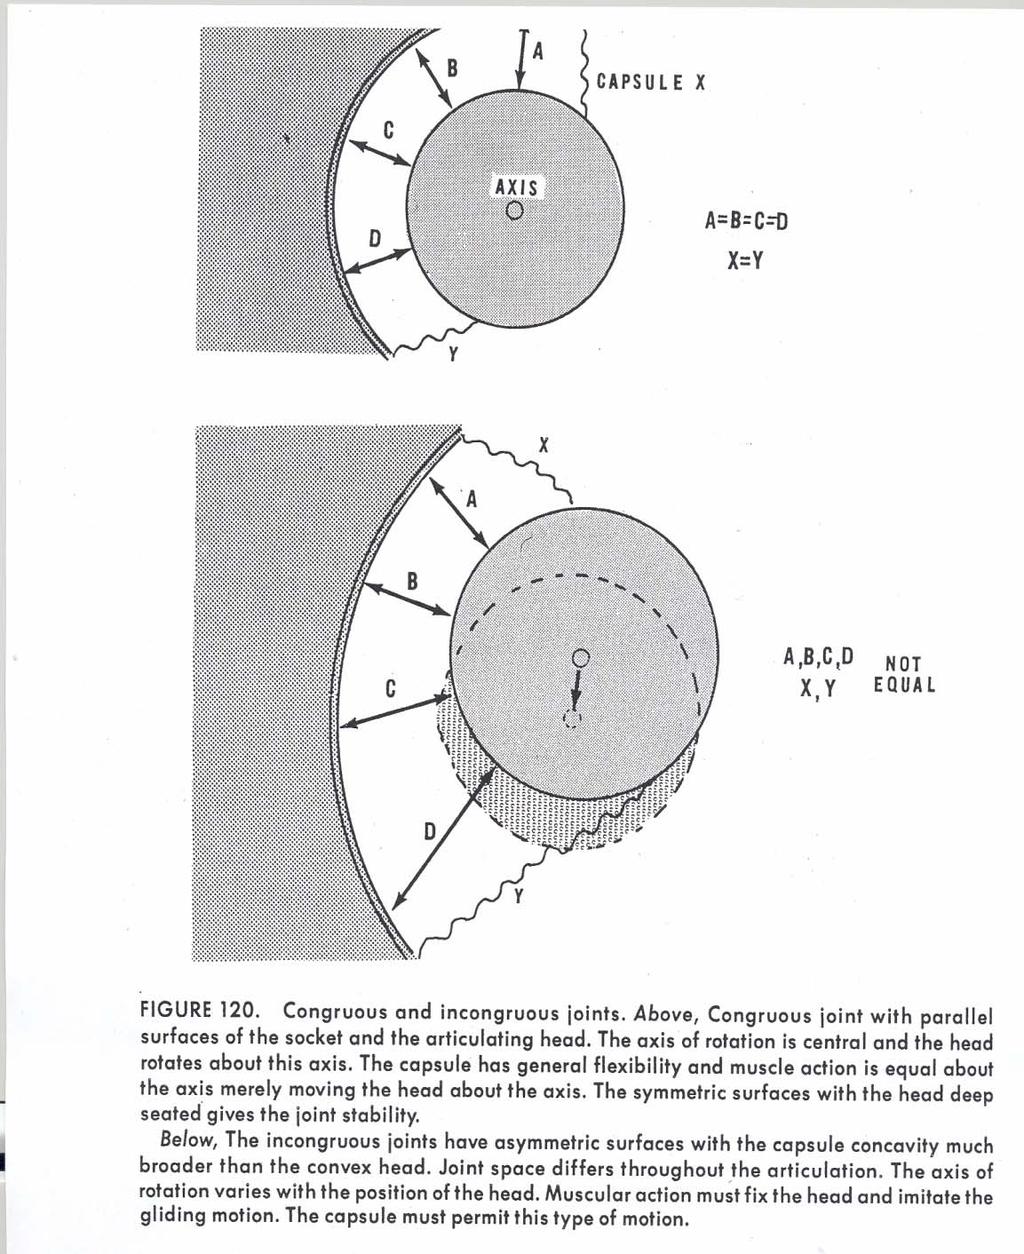 This may be derangement? Old diagram from Dr. Cailliet s book Humeral head centering?